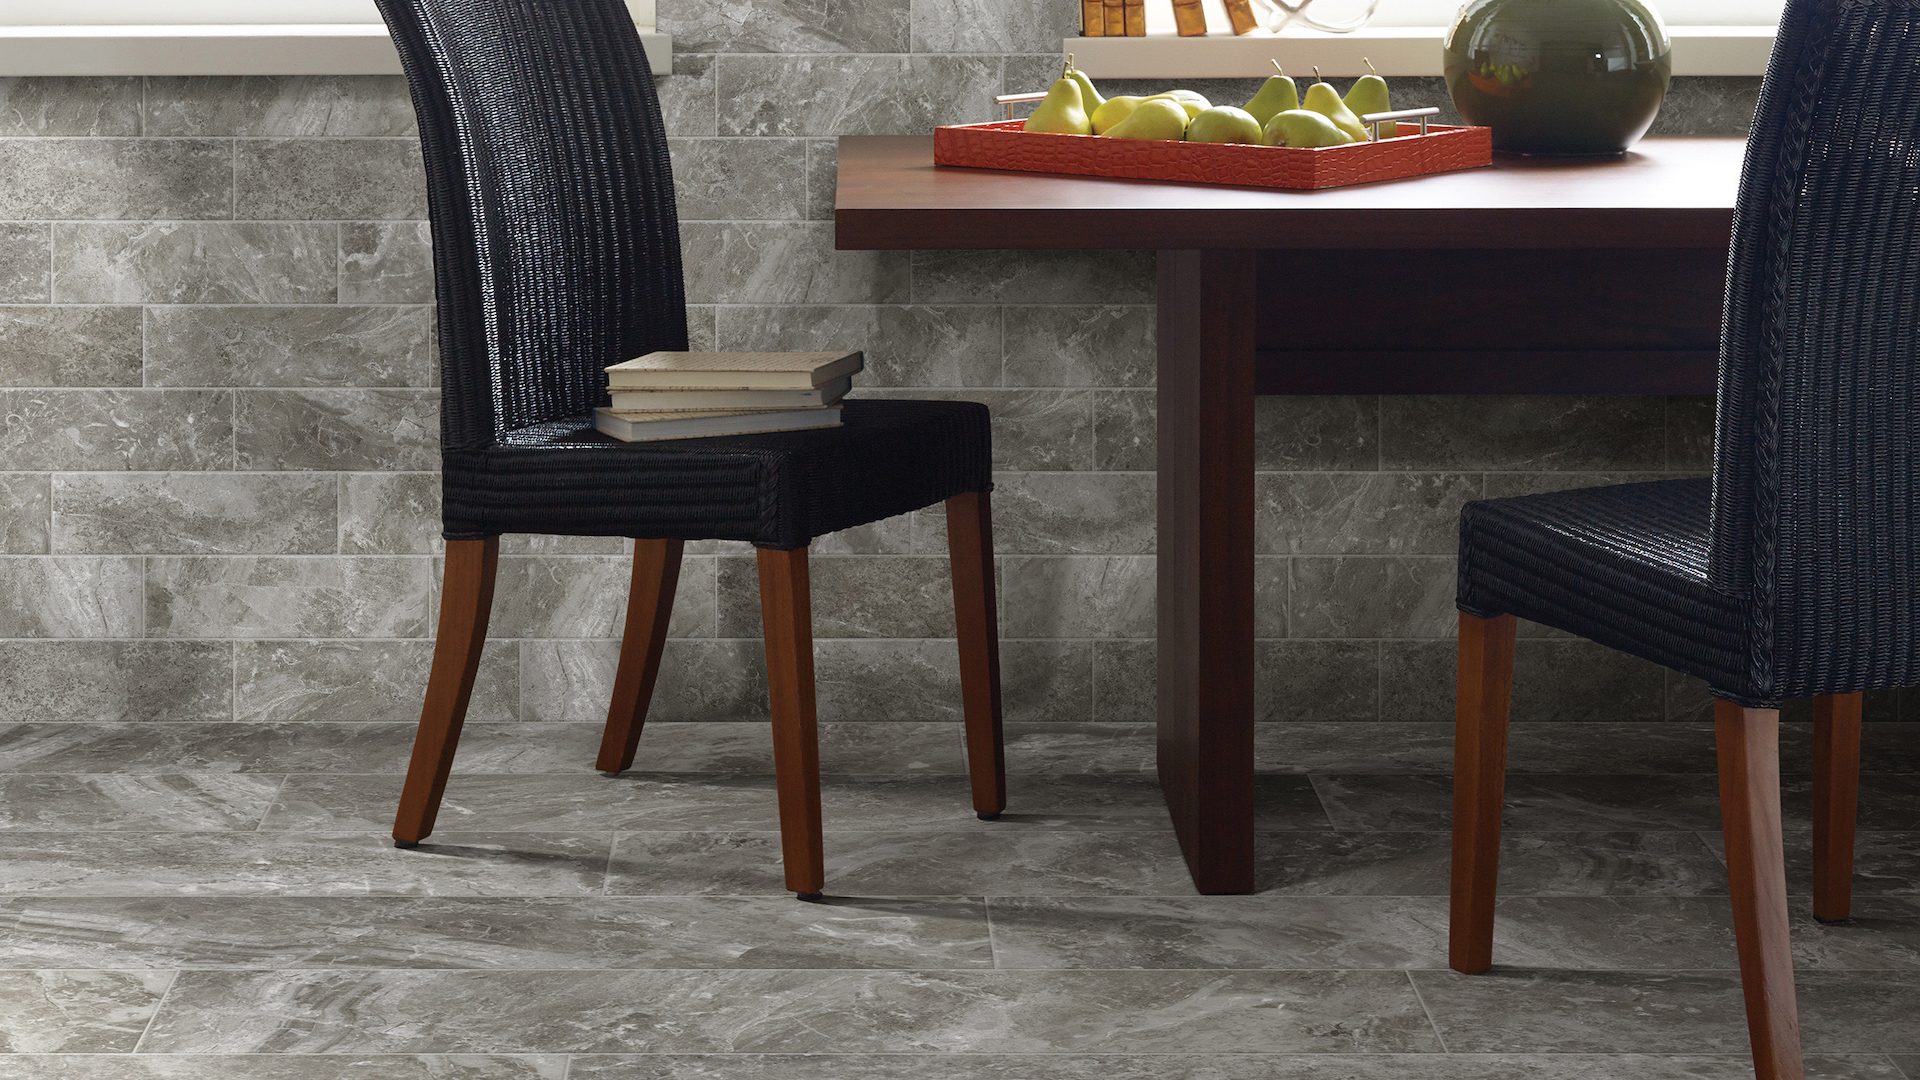 Commercial floor tiles with a side table and chairs next to a large window